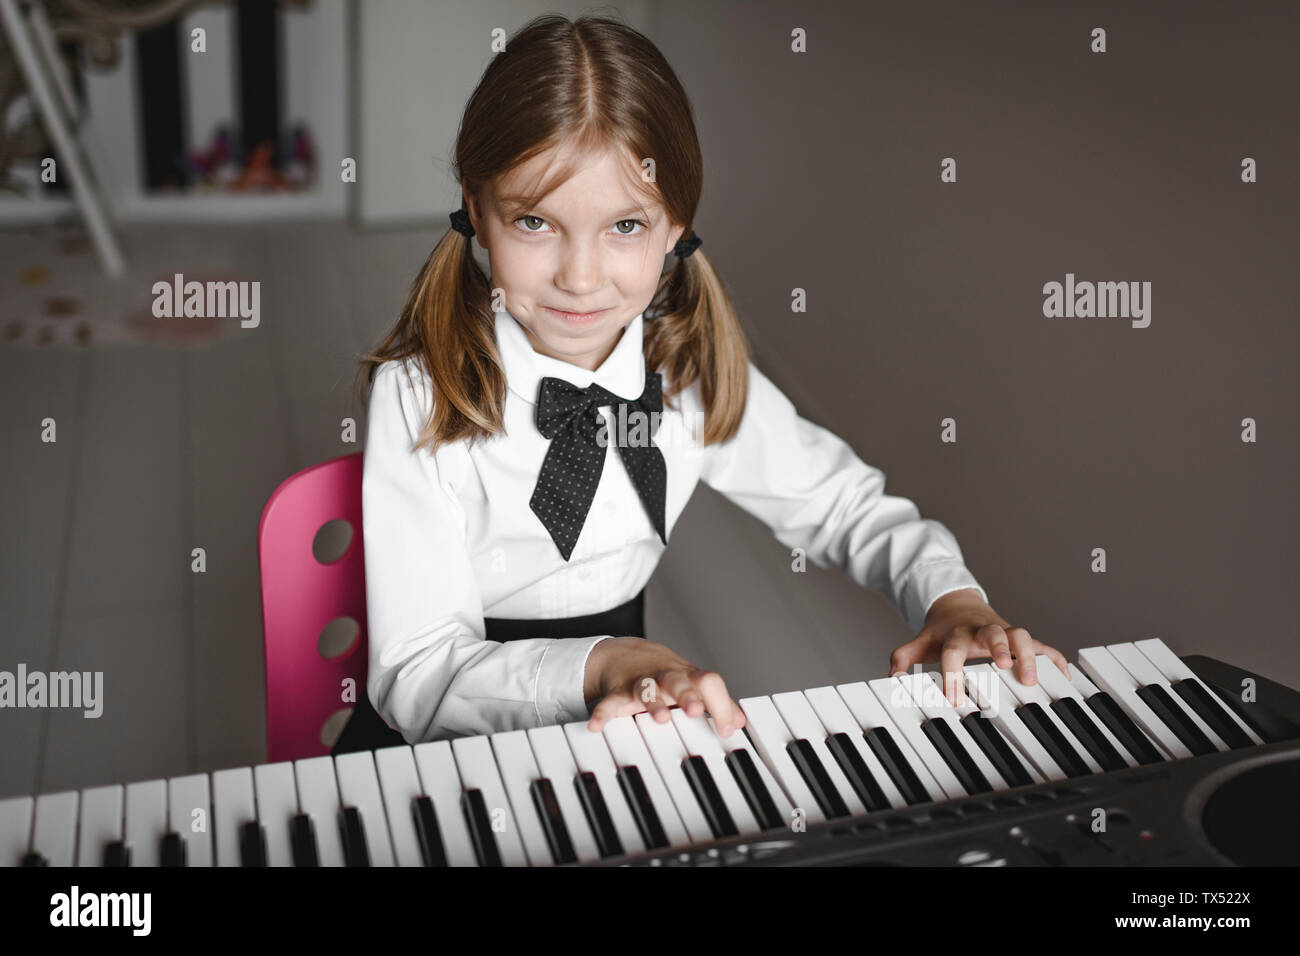 Portrait of a smiling girl playing synthesizer Stock Photo